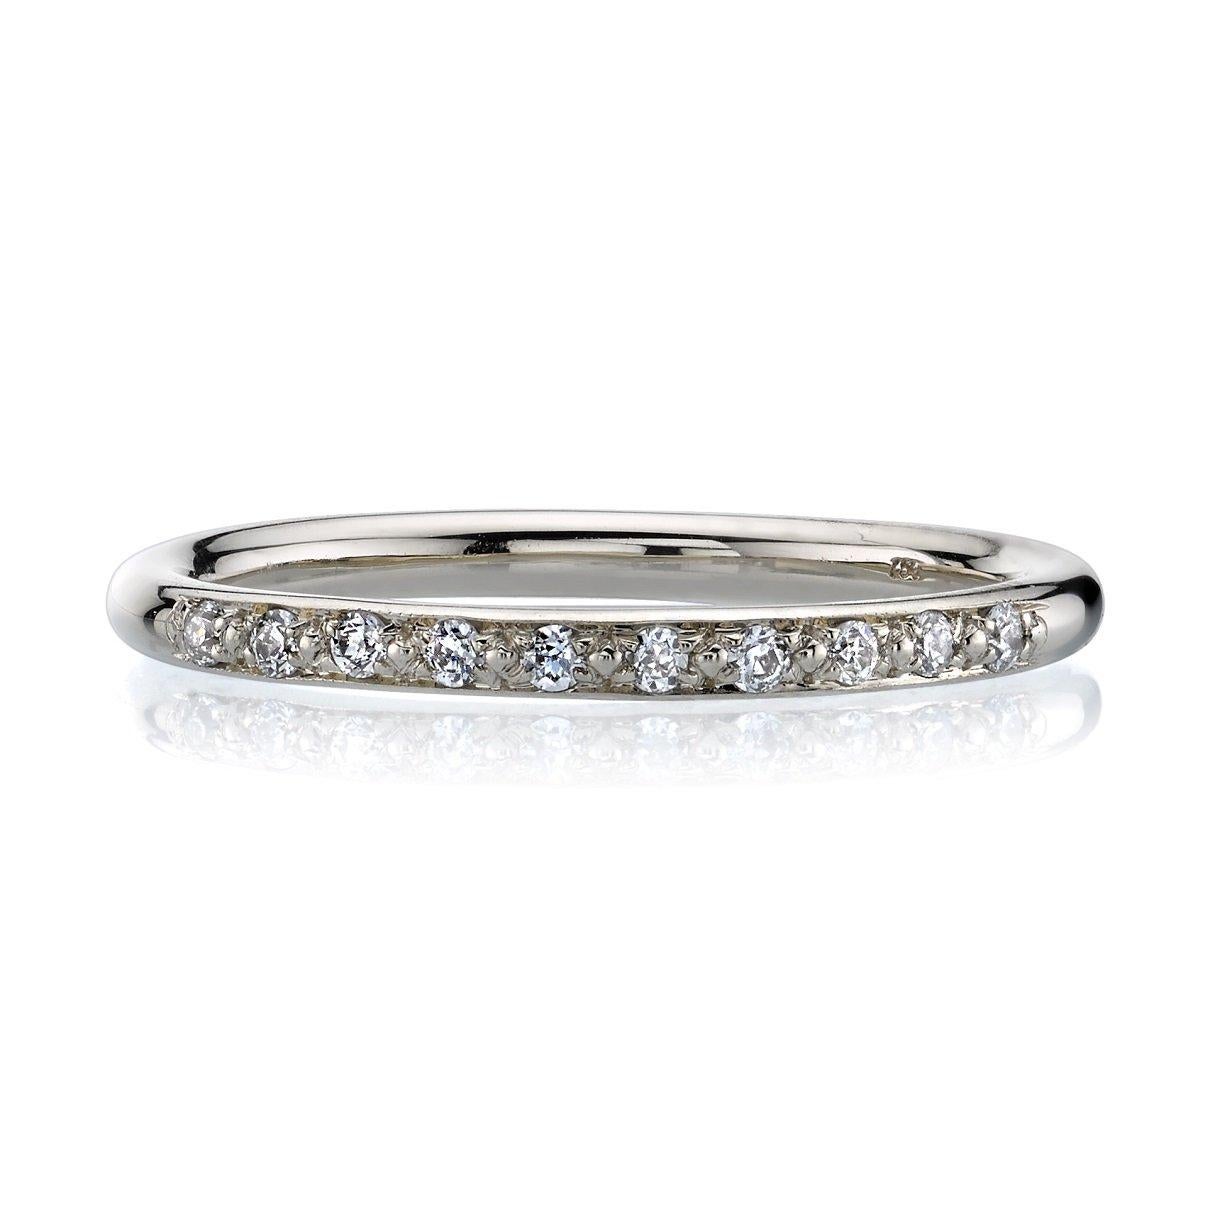 Handcrafted Jamie European Cut Diamond Pave Half Eternity Band by Single Stone In New Condition For Sale In Los Angeles, CA